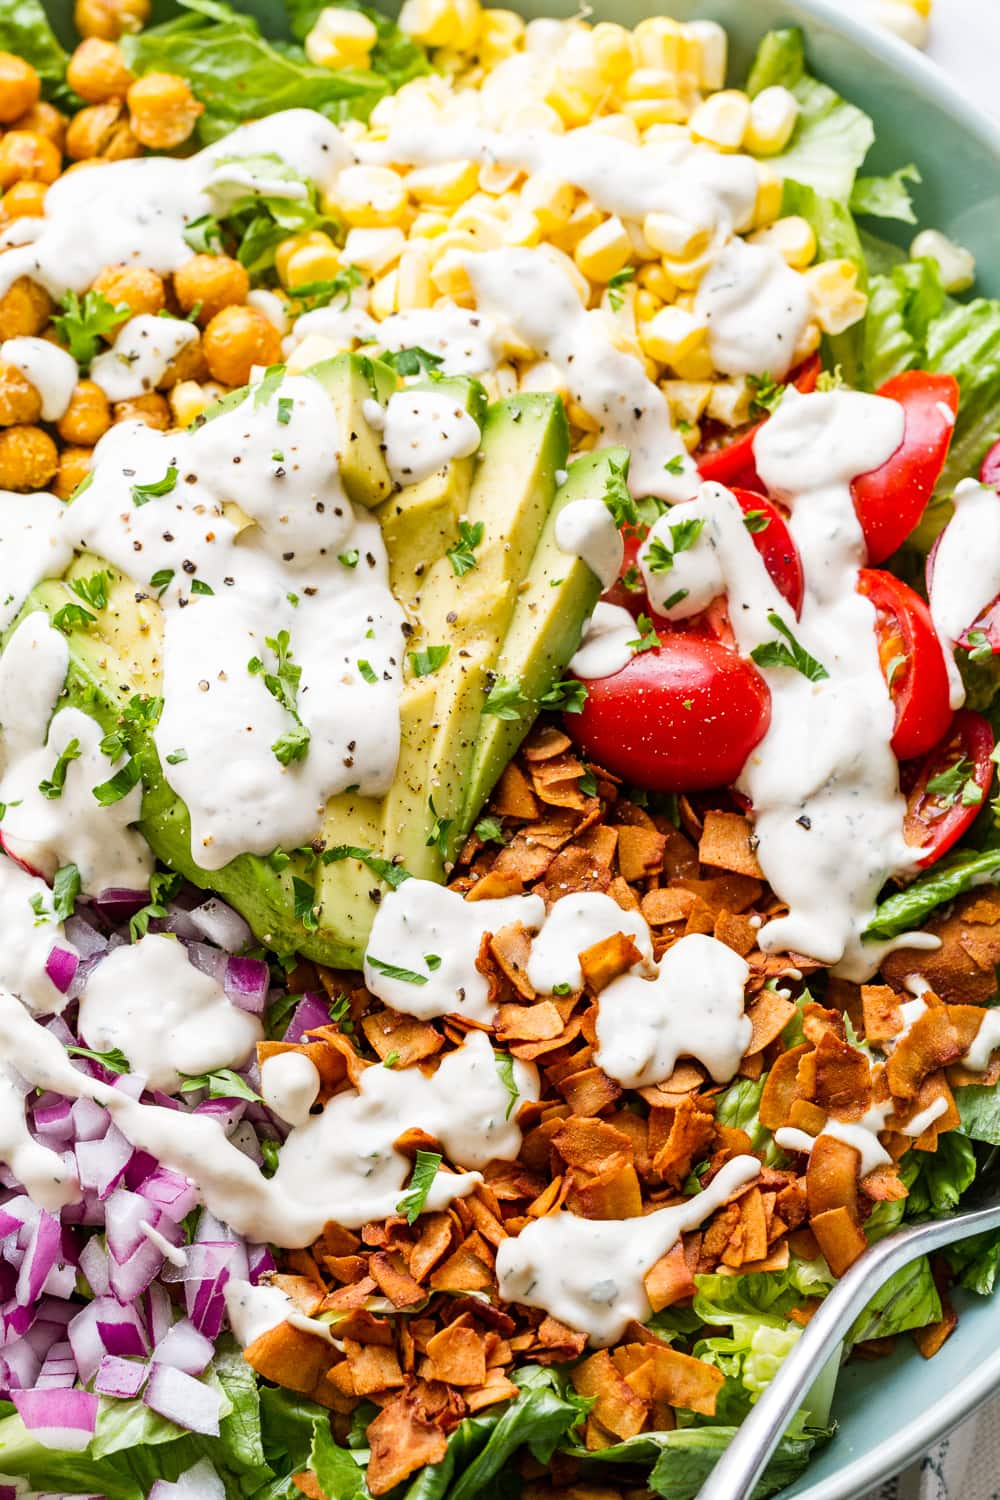 up close side angle view of vegan cobb salad with vegan ranch dressing.